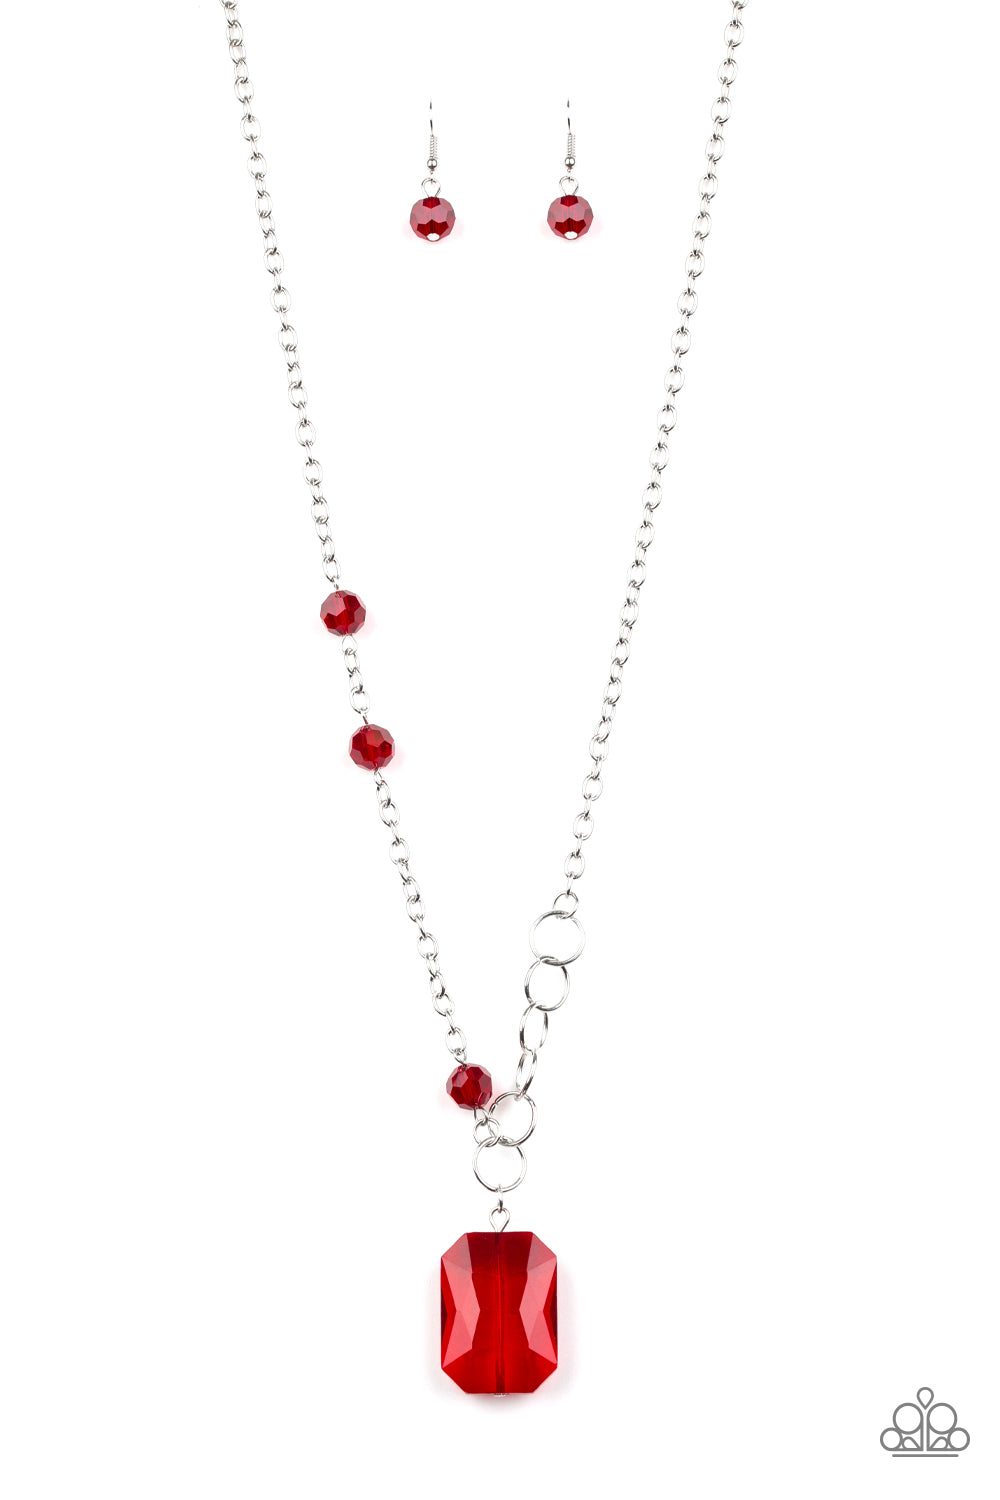 Never a Dull Moment Red Paparazzi Necklaces Cashmere Pink Jewels - Cashmere Pink Jewels & Accessories, Cashmere Pink Jewels & Accessories - Paparazzi